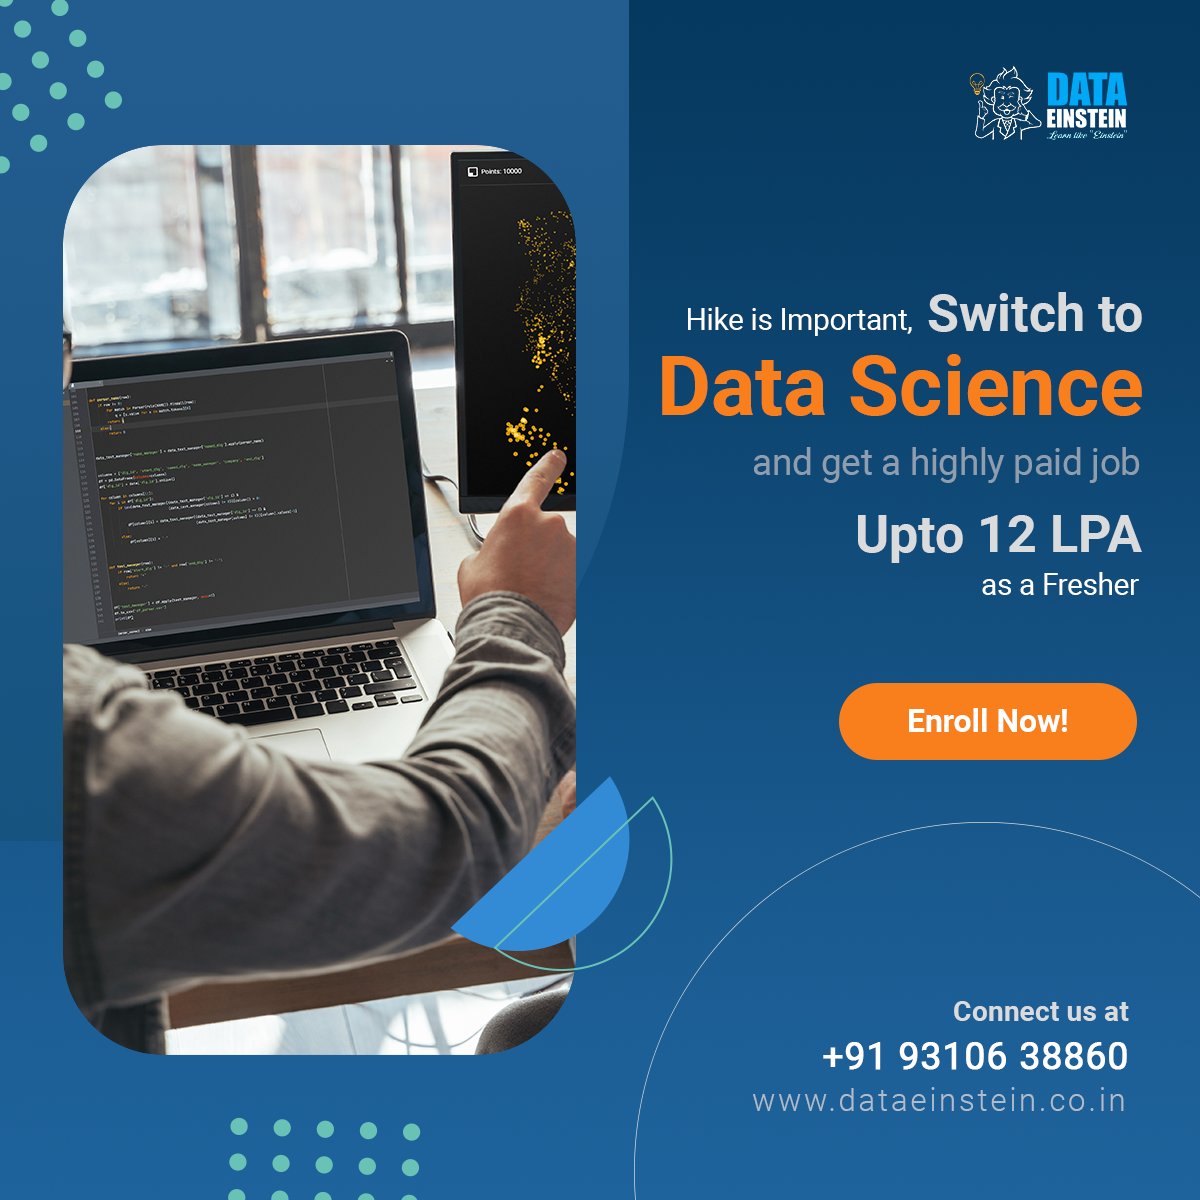 Unlock Limitless Career Opportunities with Data Science!
Join our course and experience exponential career growth. 

#DataScience #CareerOpportunities #DataAnalysis #MachineLearning #BigData #AI #DataVisualization #Coding #Statistics #Python #RProgramming #DataMining #Business